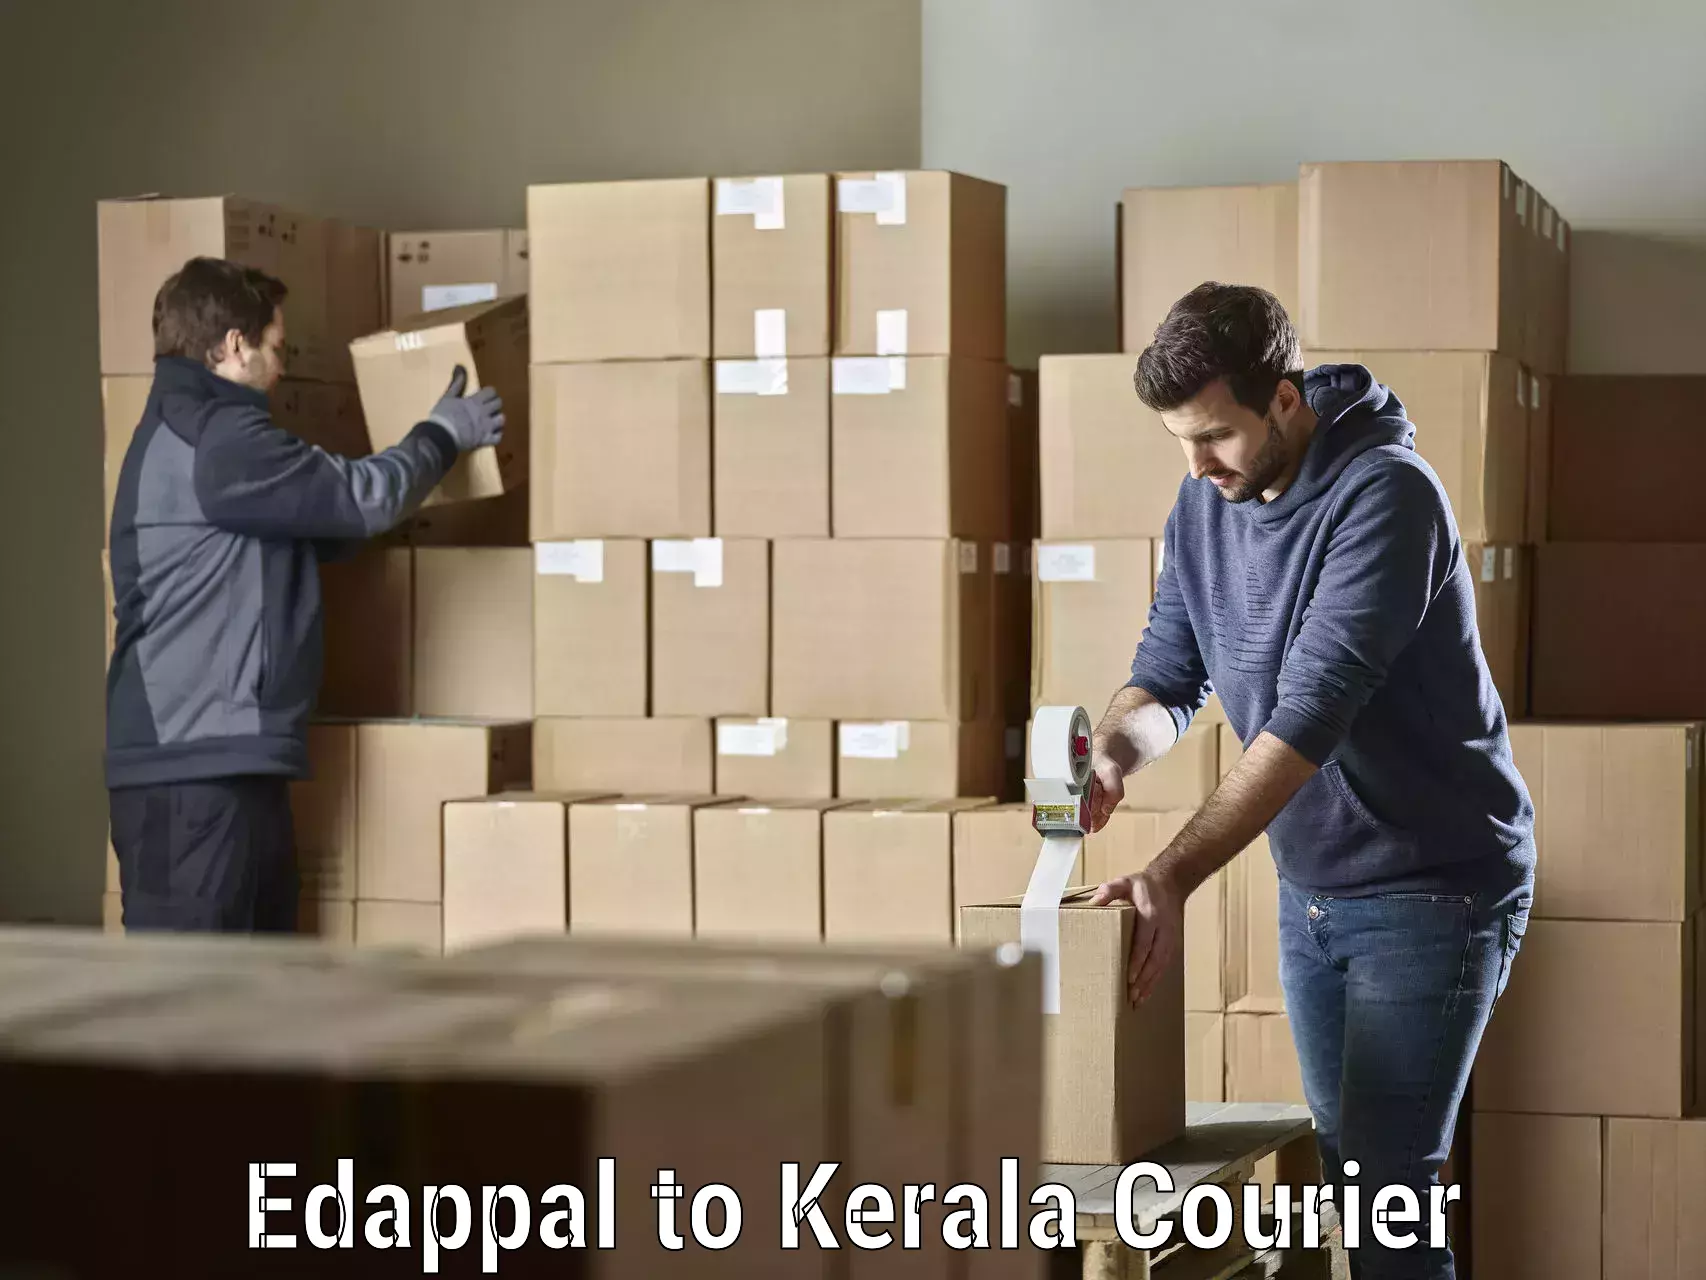 Nationwide parcel services Edappal to Cochin Port Kochi